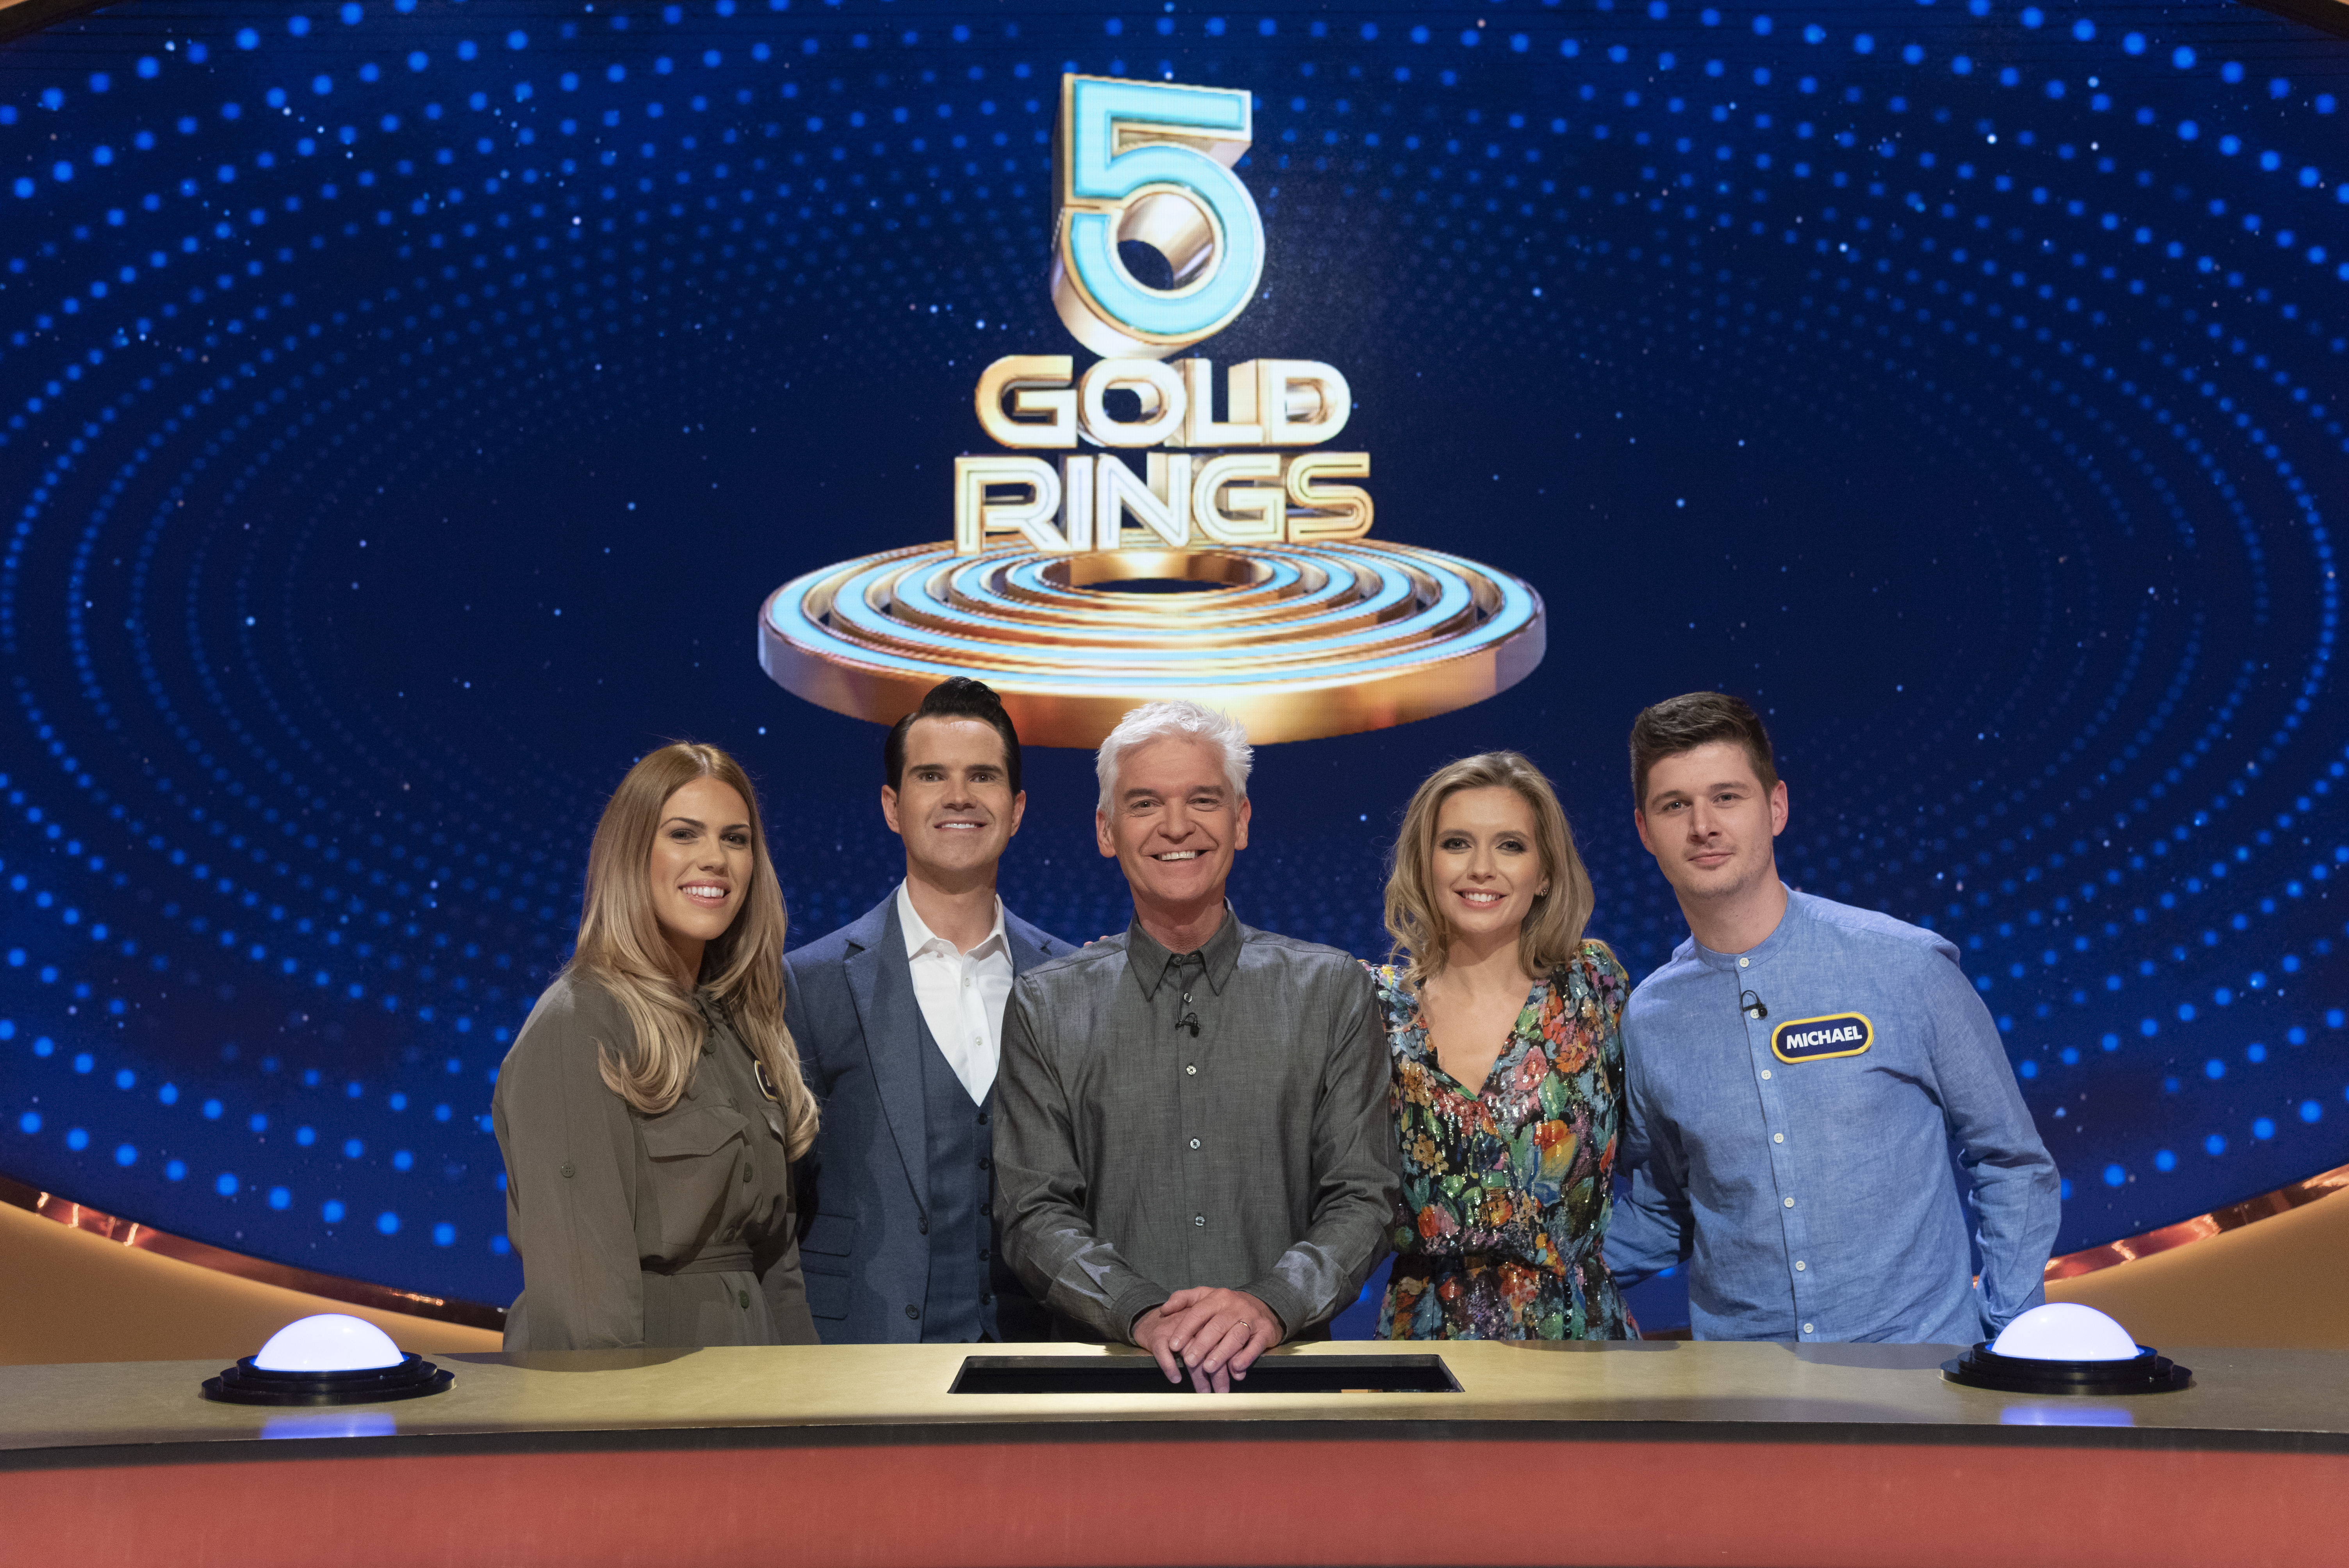 Series 3 of 5 Gold Rings starts this Sunday with a celebrity special